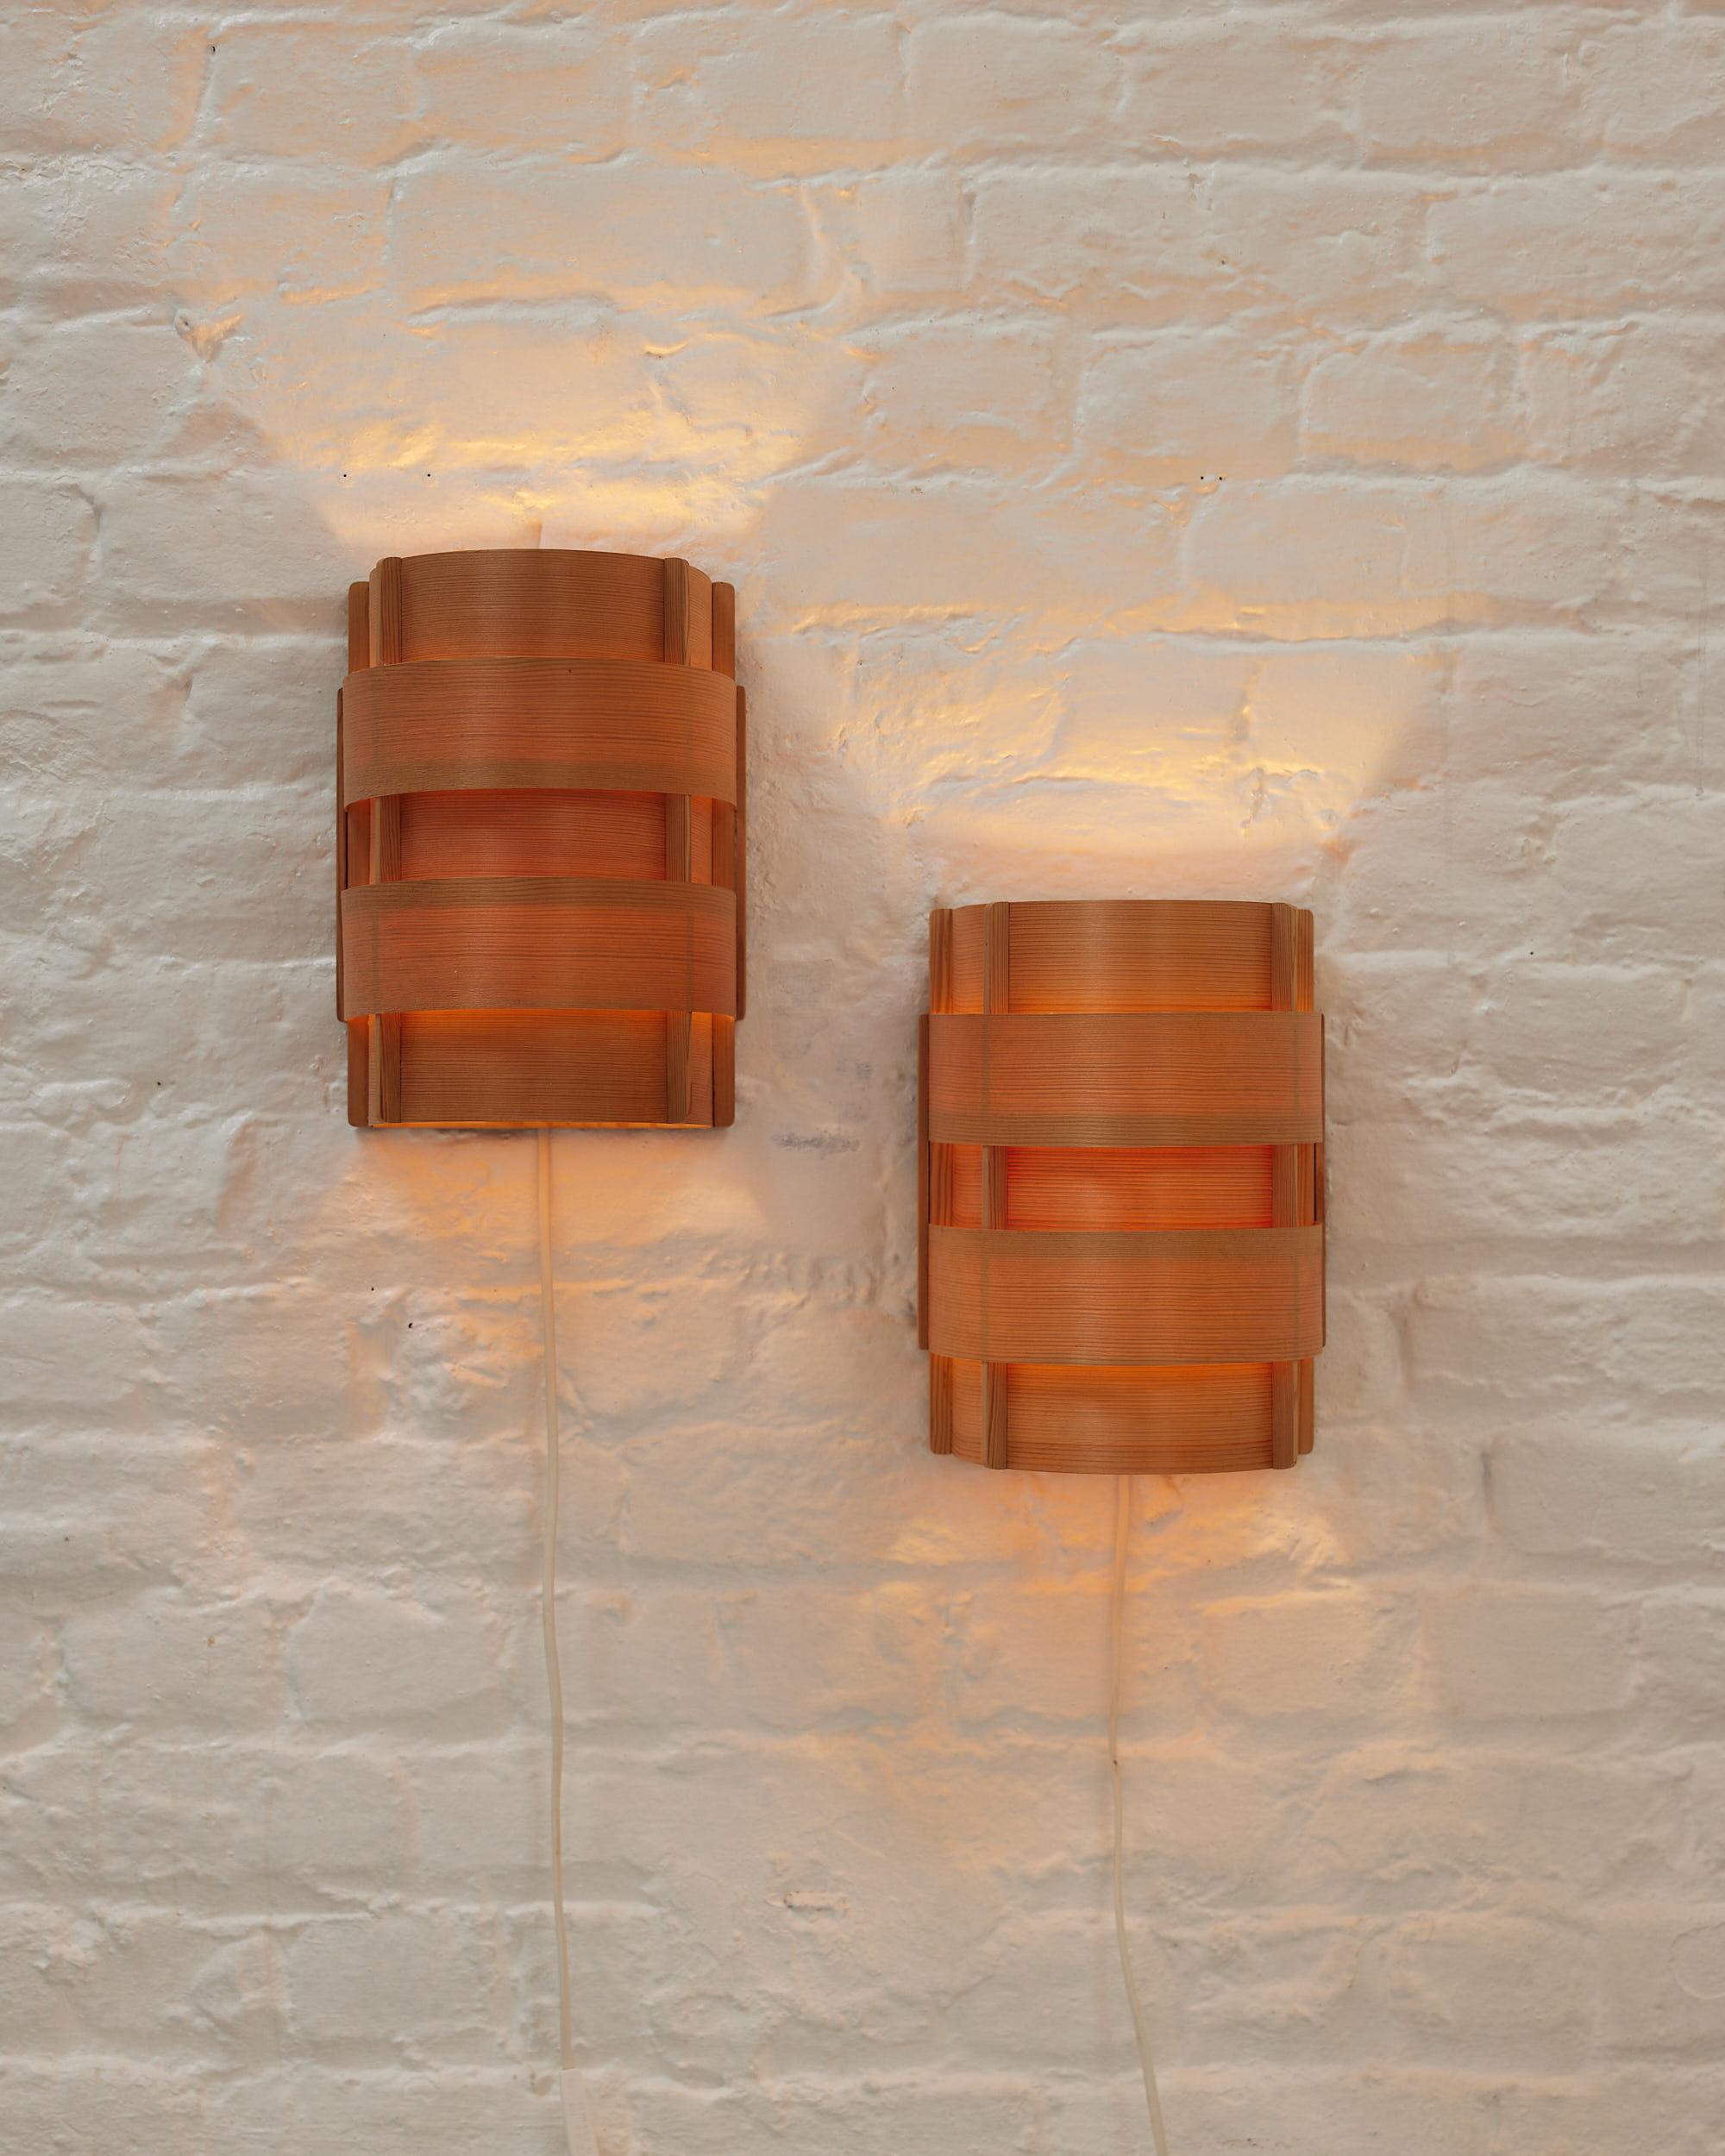 Minimalistic Scandinavian wall lamps from 1950’s, designed by Hans Agne Jacobsen with the Ellysett
Markaryd label and known as the model «Edda». The lamps are made of neatly bent pine wood sheets and connected to a wooden frame. Transparent and warm